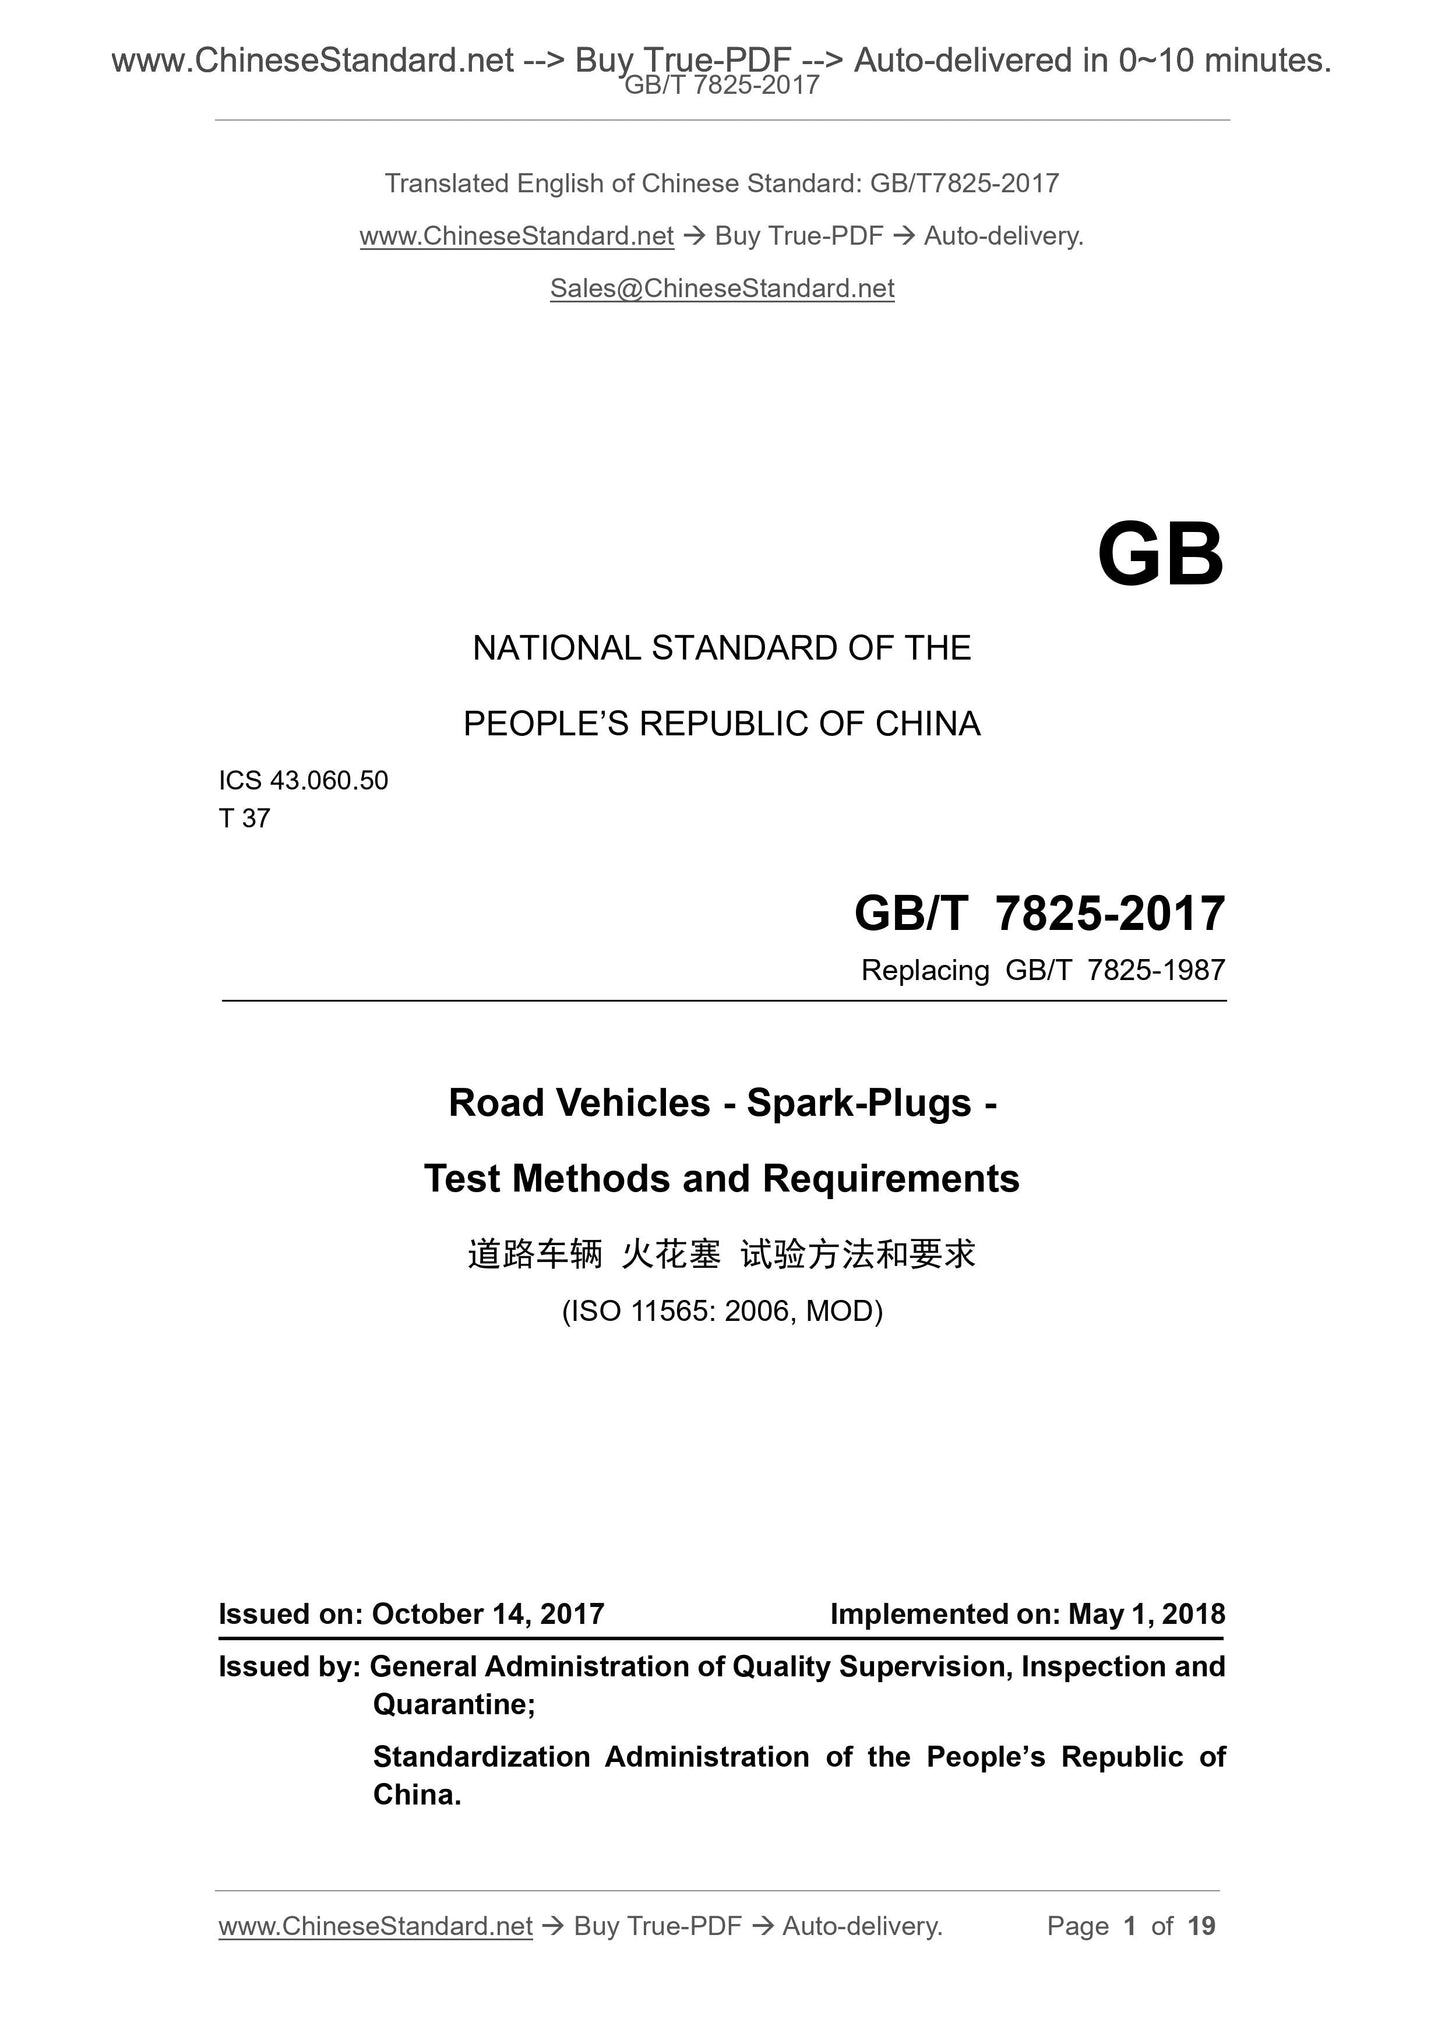 GB/T 7825-2017 Page 1